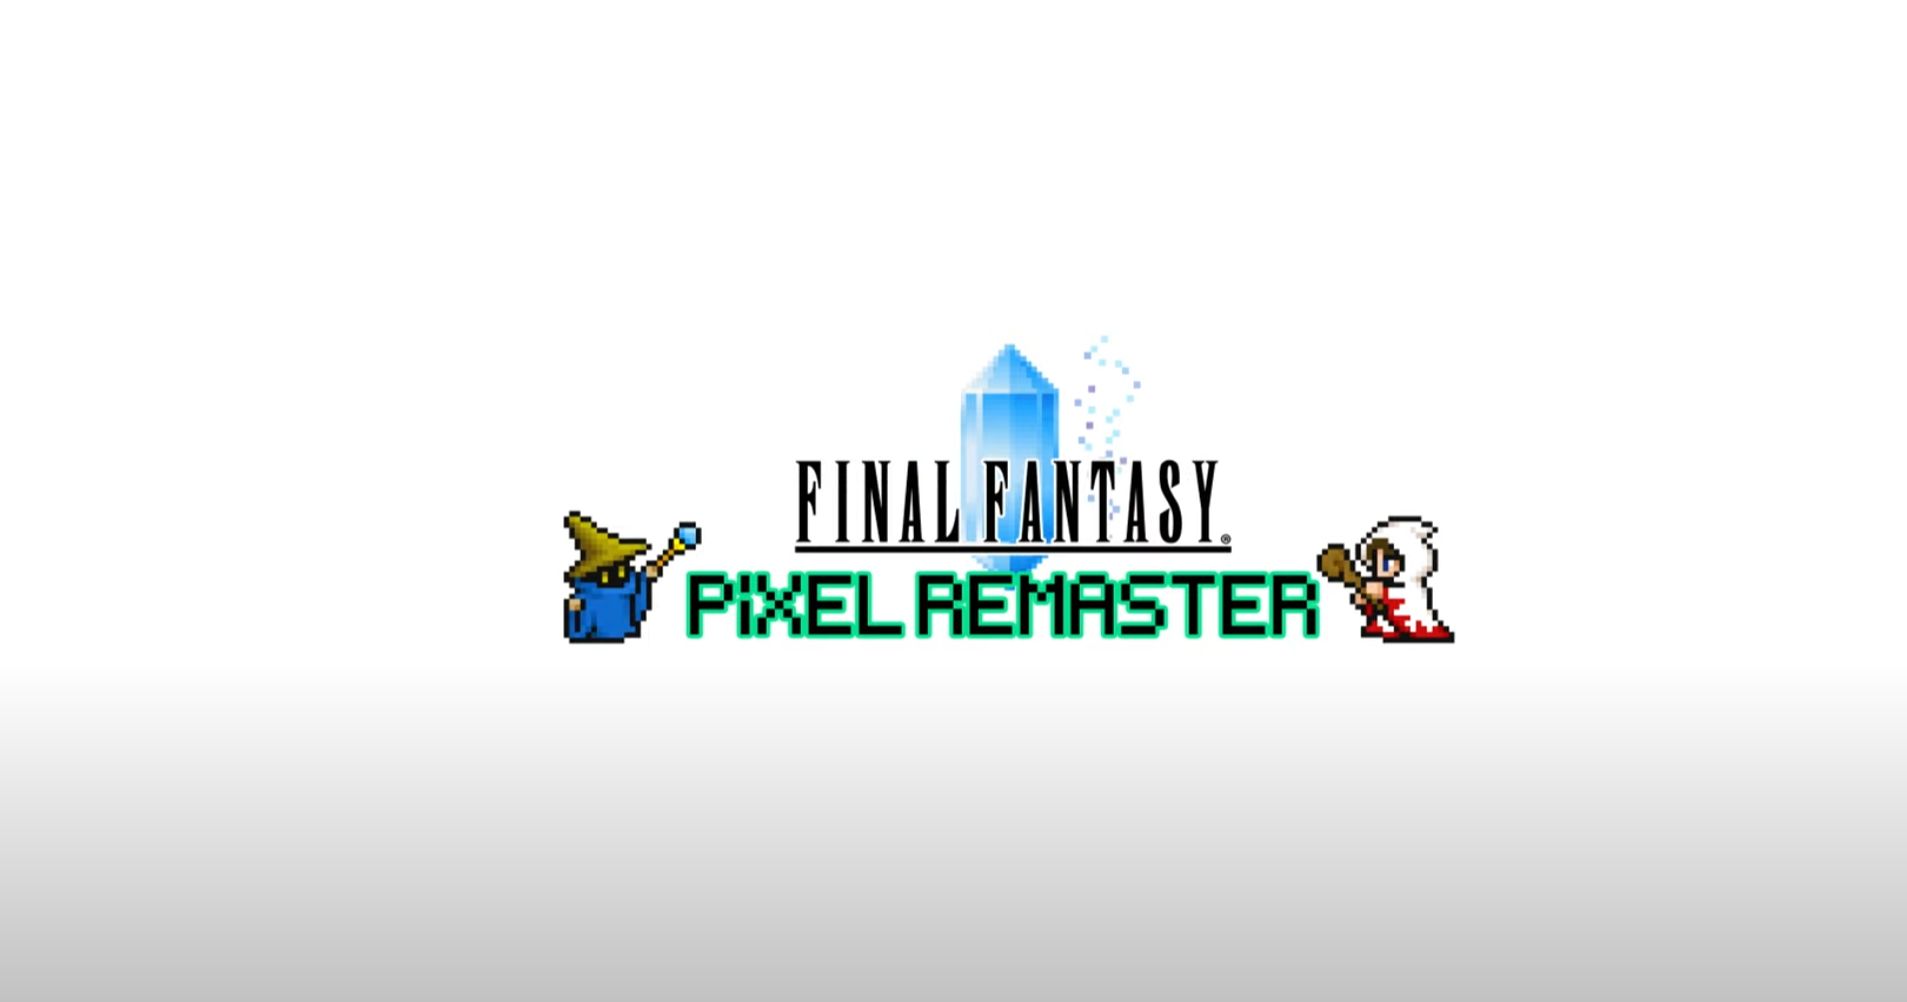 Image for Final Fantasy Pixel Remaster series of Final Fantasy 1-3 will be released on July 28